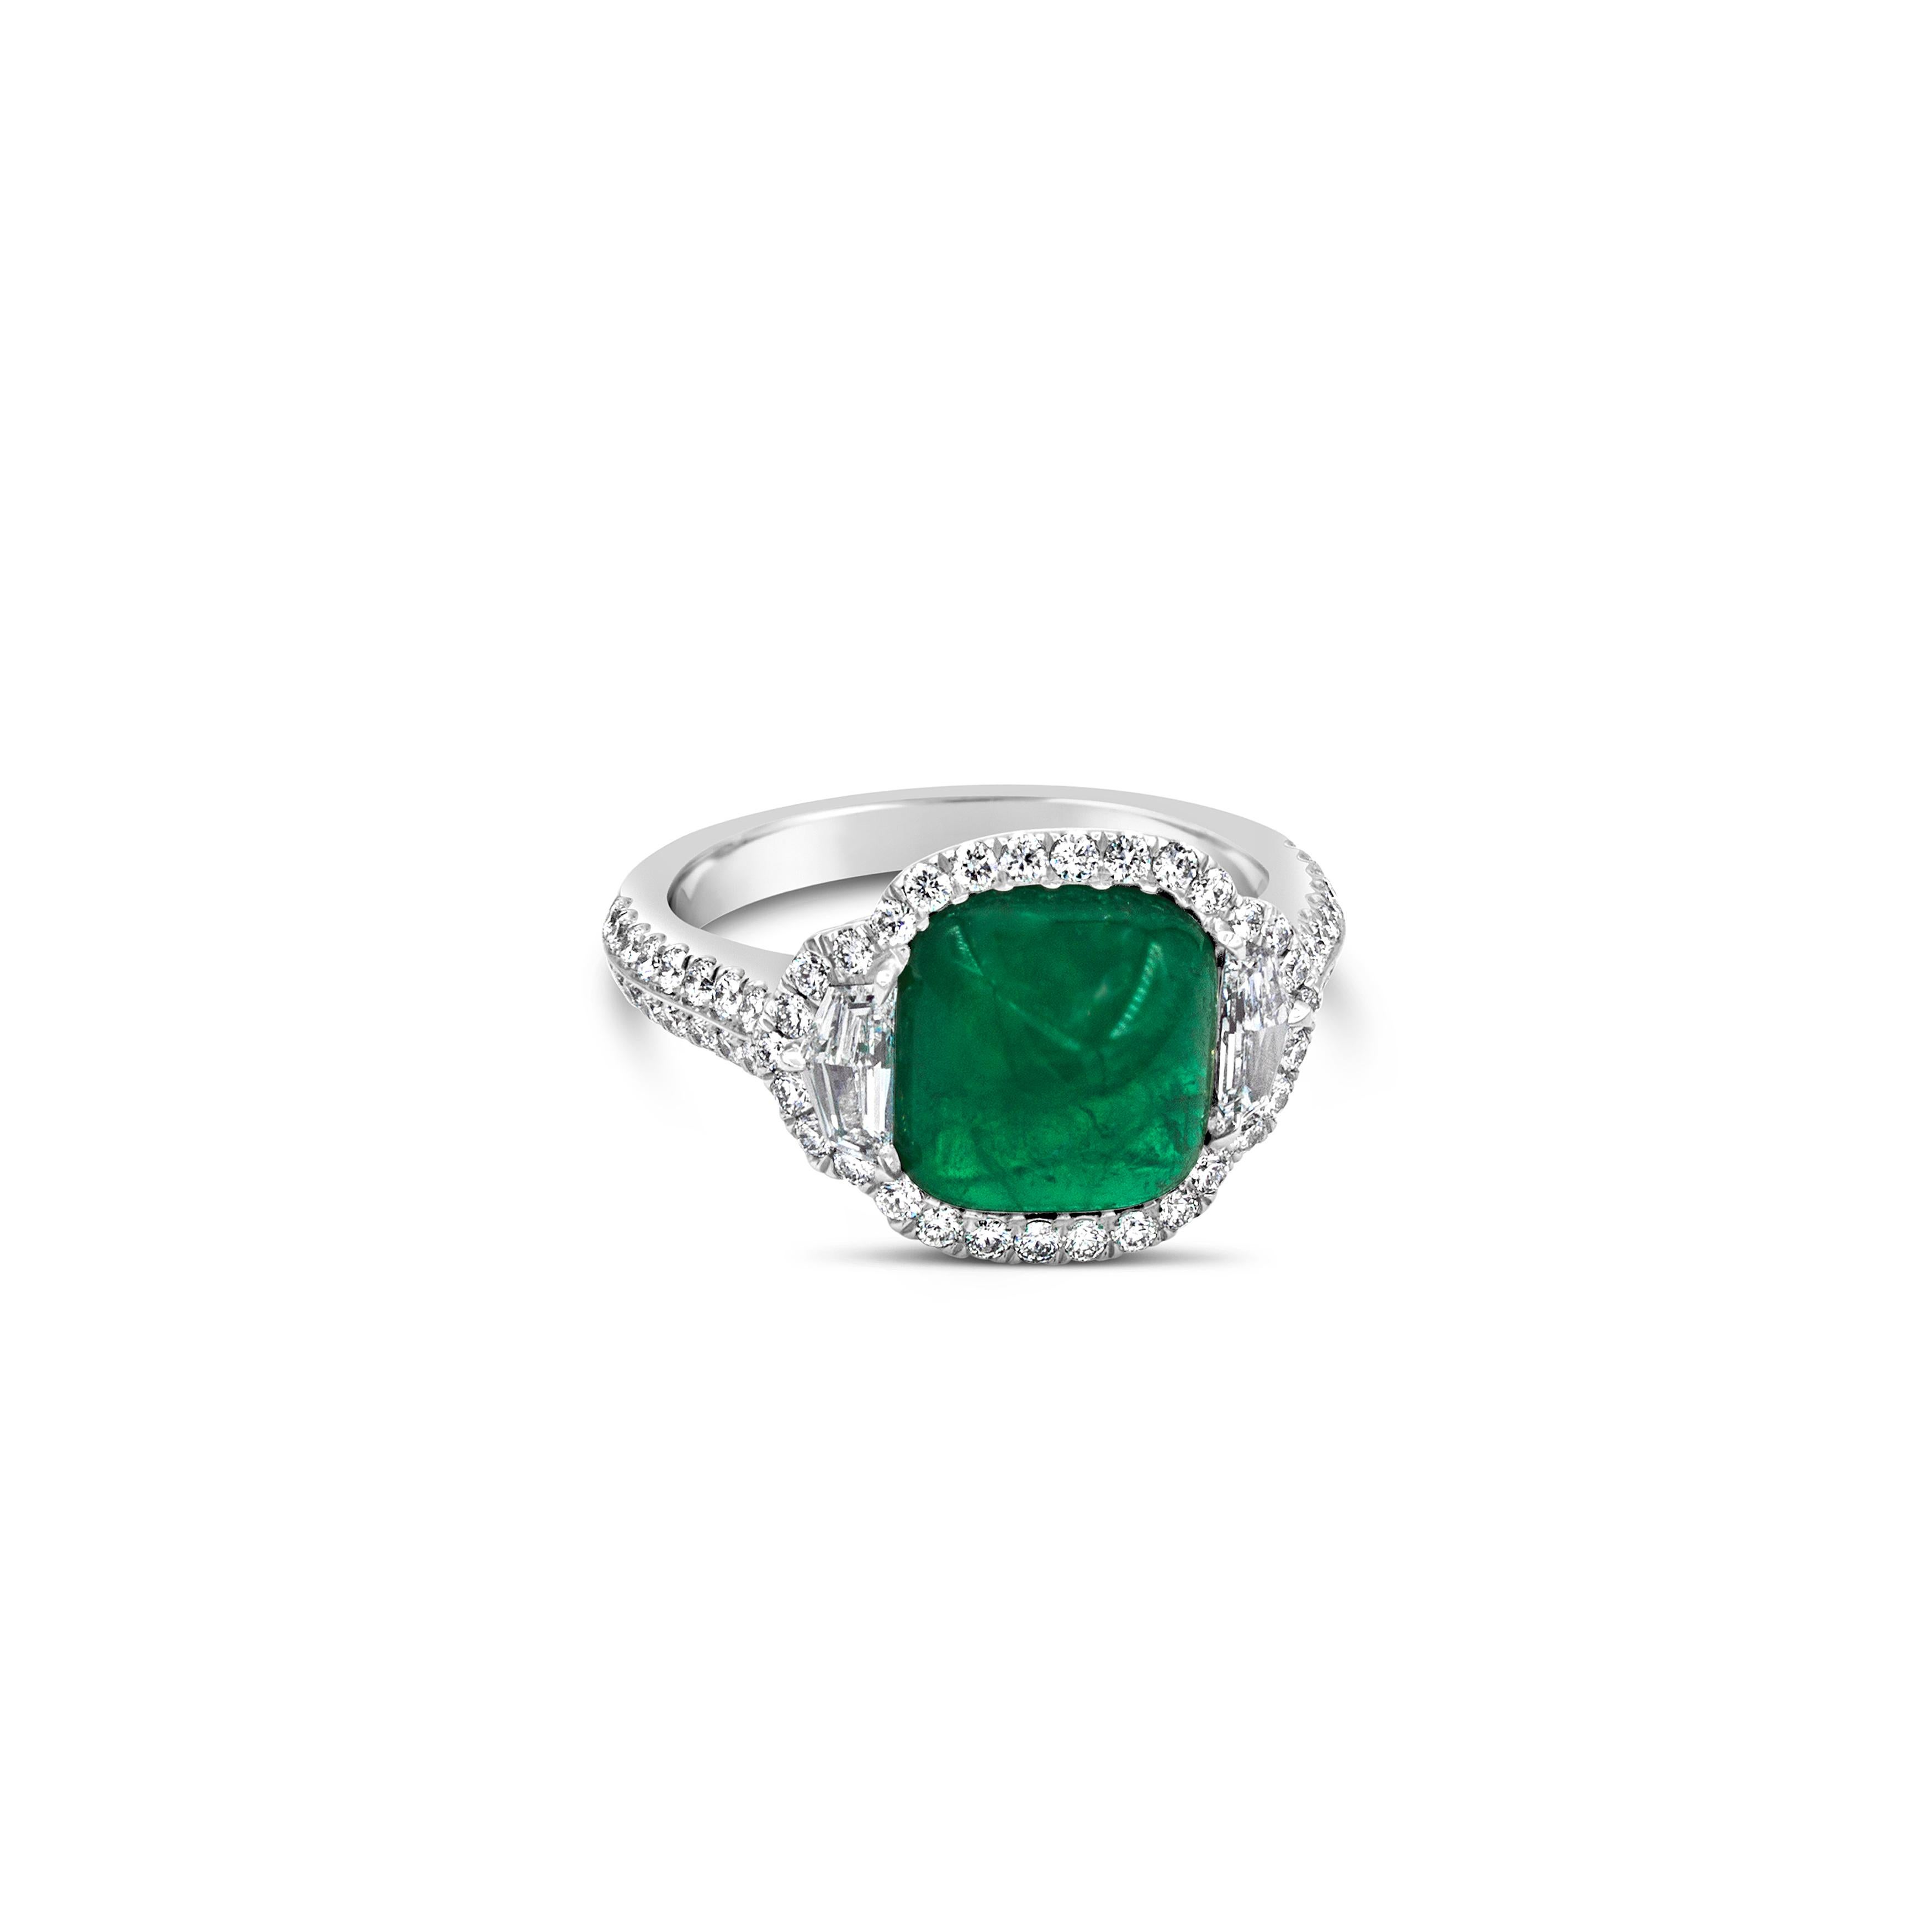 Showcases a cabochon emerald center weighing 3.42 carats, flanked by epaulet diamonds. Surrounded by a single row of round diamonds on an accented platinum band. Diamonds weigh 0.81 carats total. 

